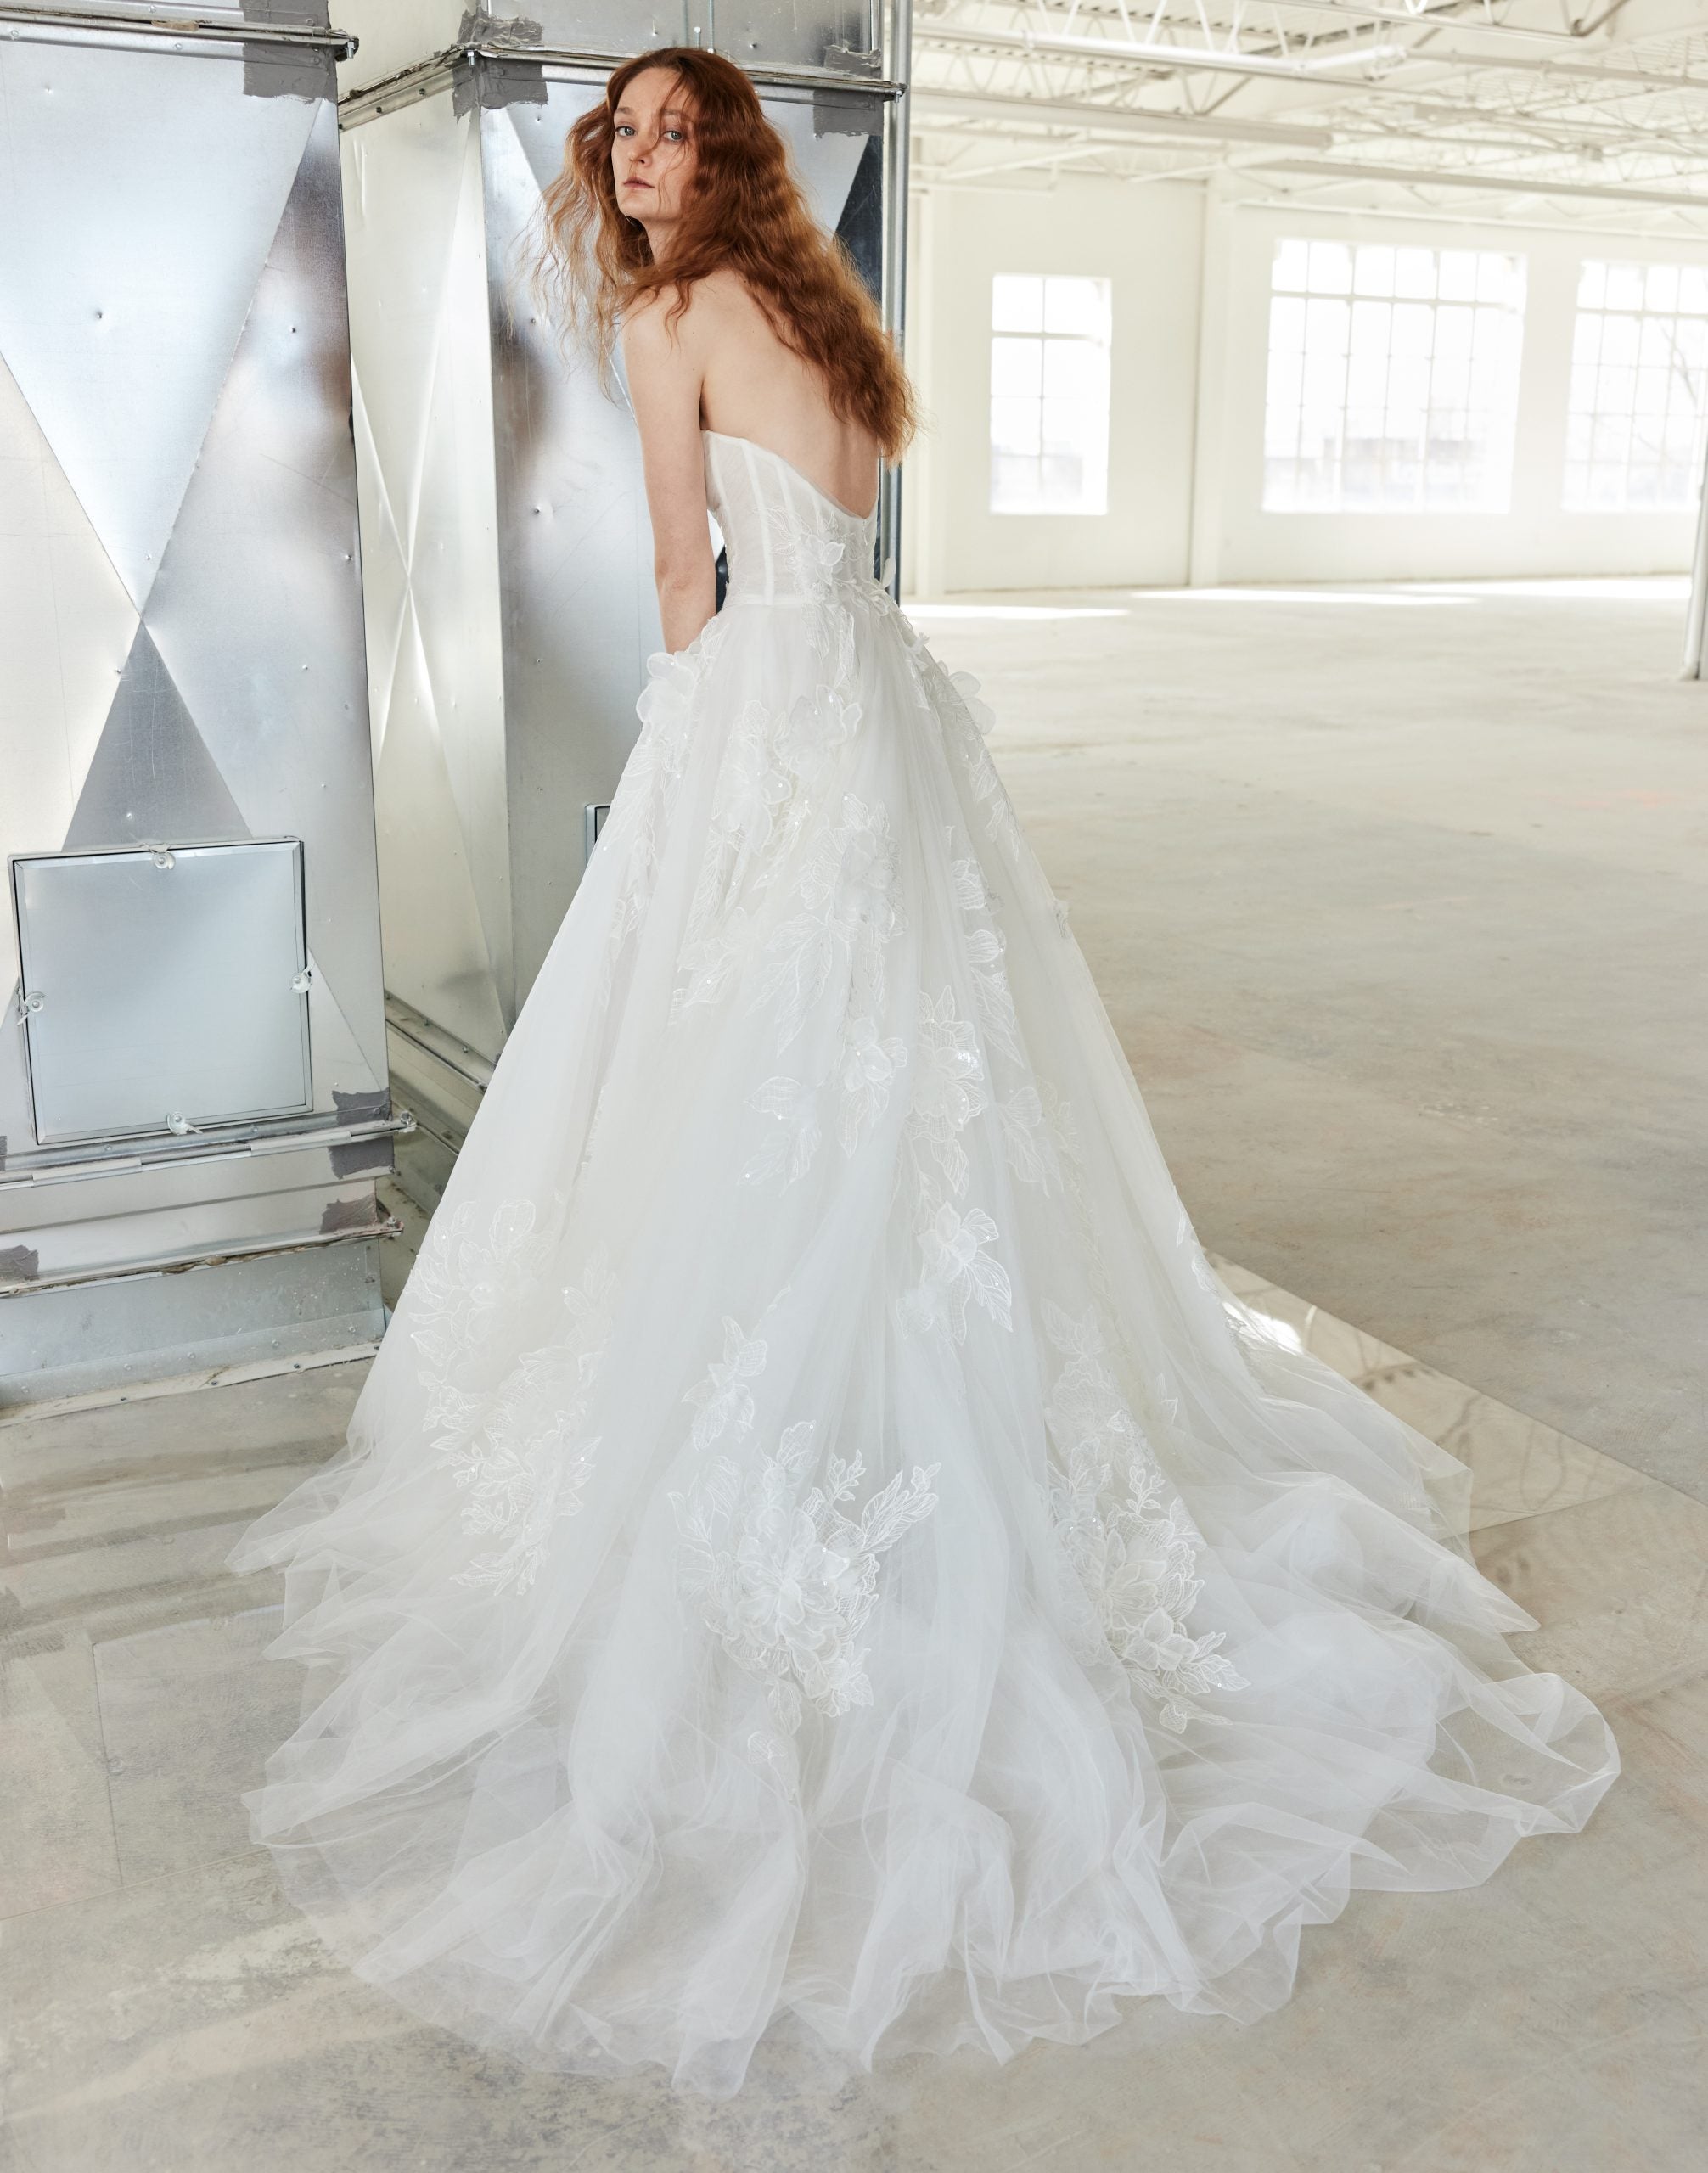 Romantic Tulle Floral Ball Gown by Rivini - Image 2